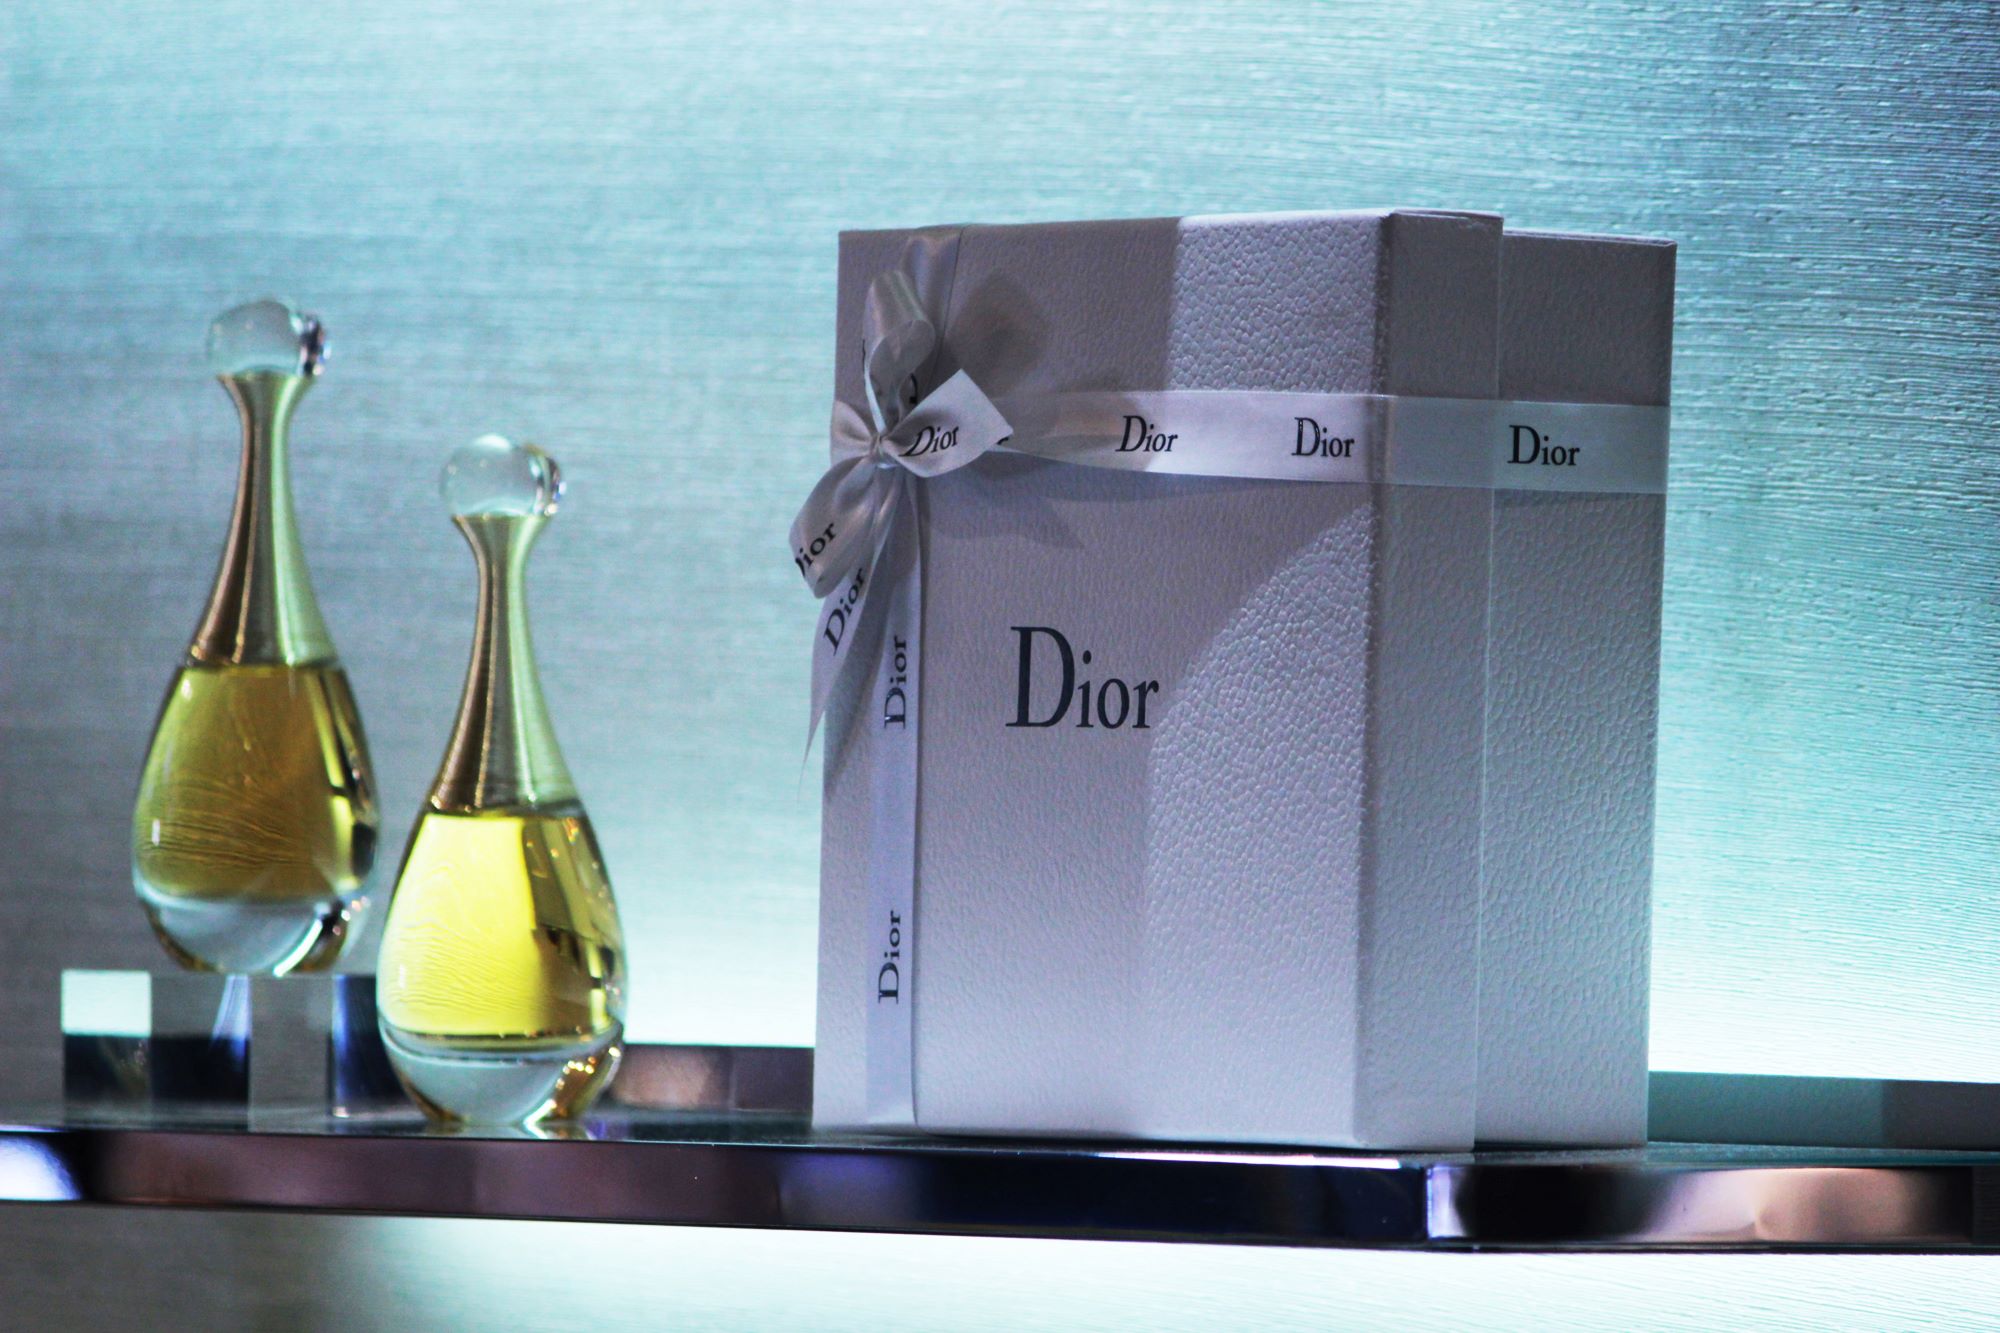 Dior Mother's Day Gifts